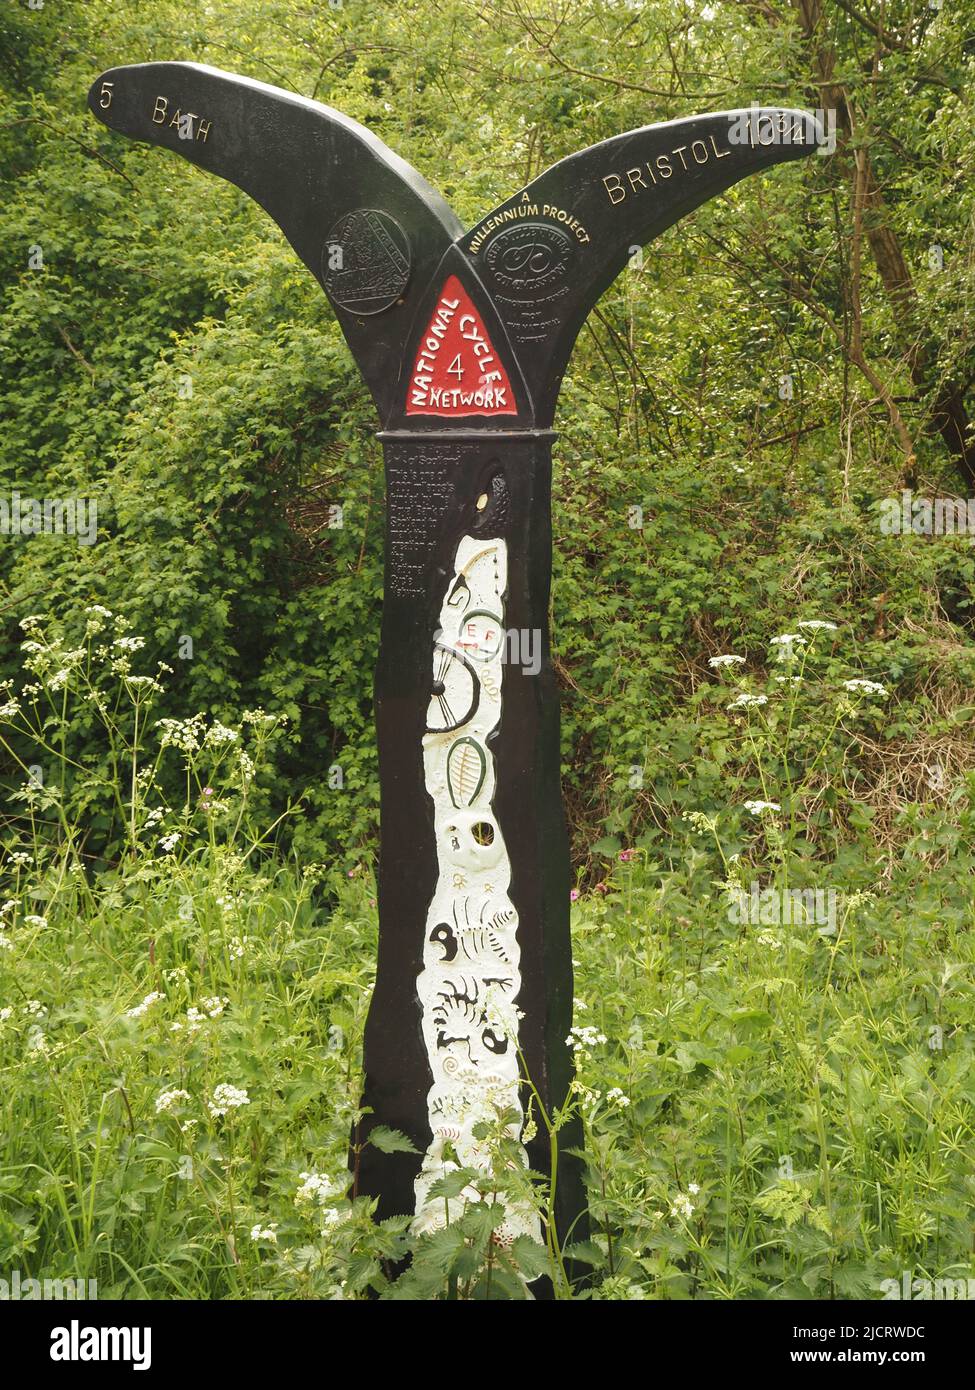 Milennium project milepost on the Bristol to Bath cycle walkway, part of National Cycle Network route 4, following a disused railway line. May 2022. Stock Photo